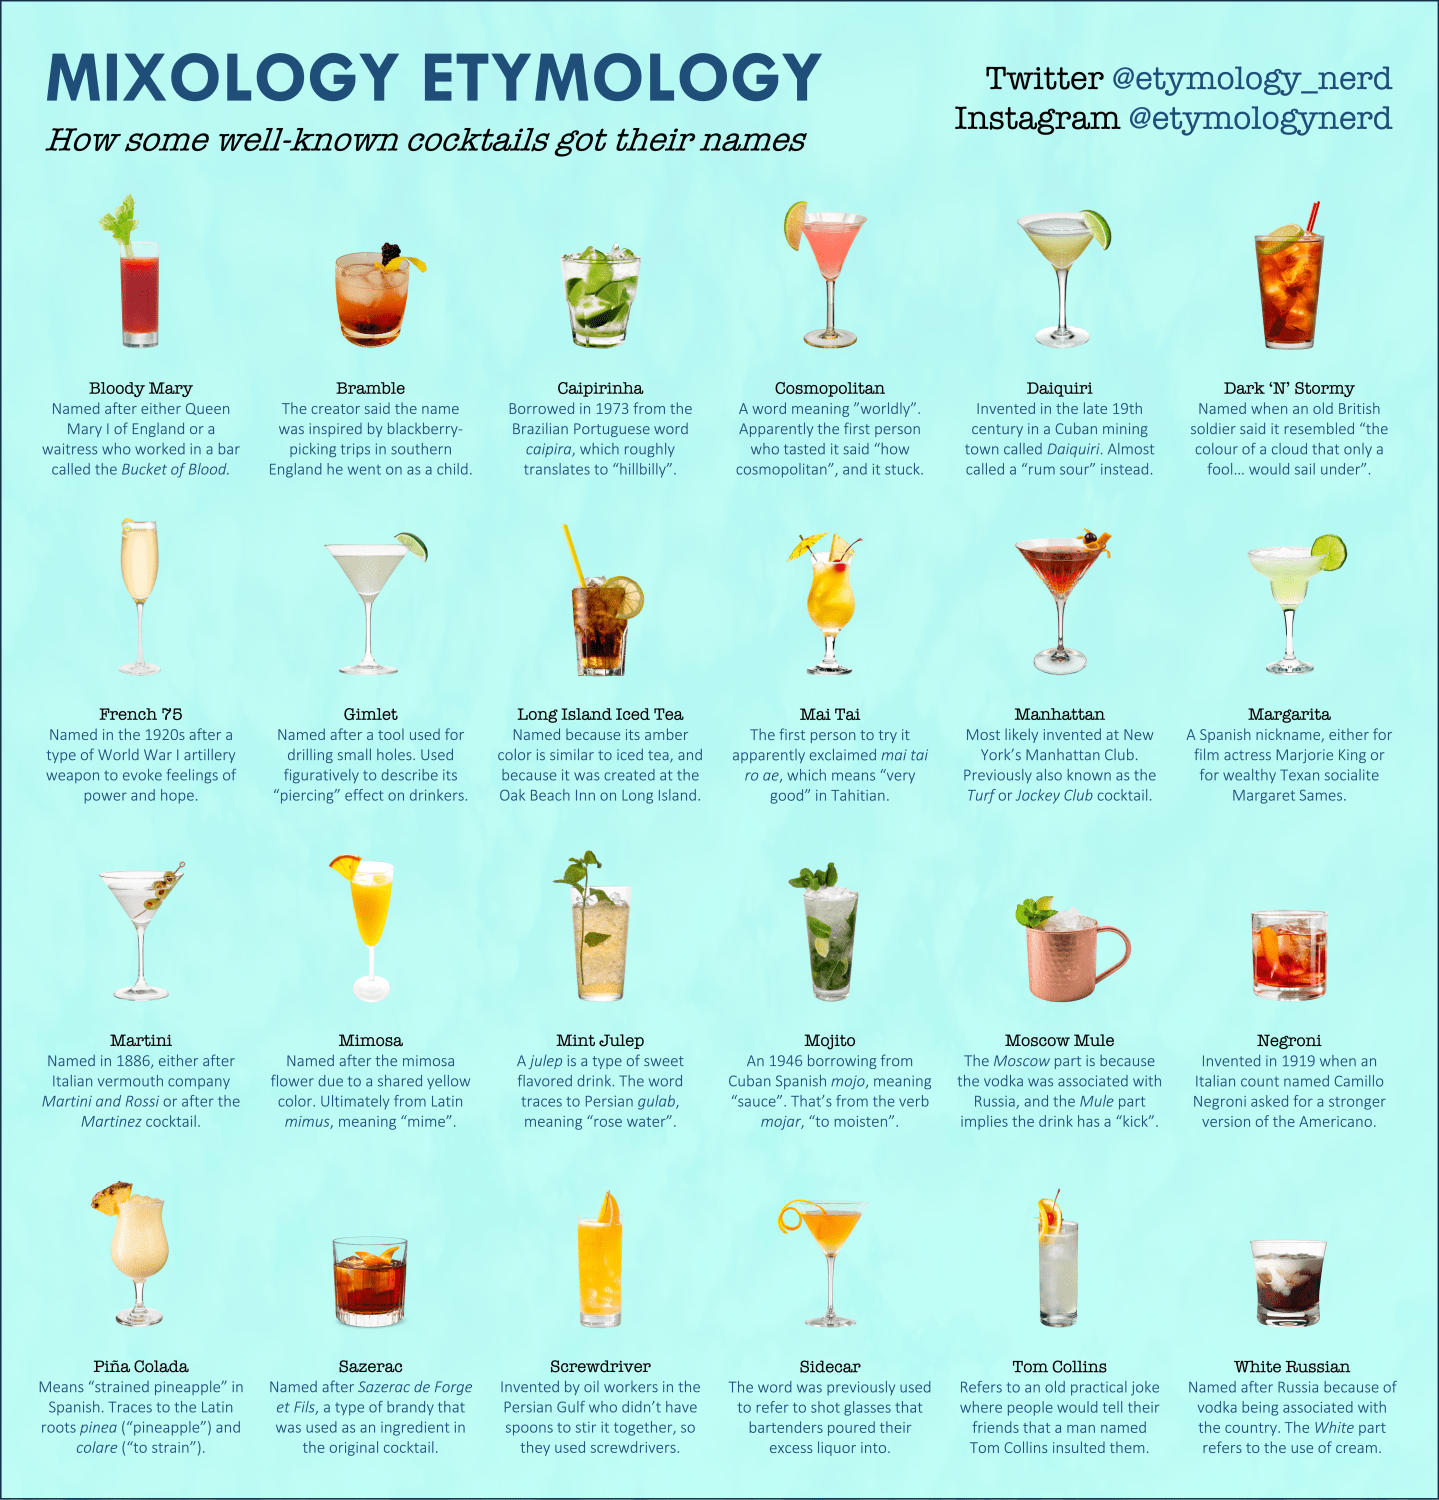 I made a guide explaining how different types of cocktails got their names